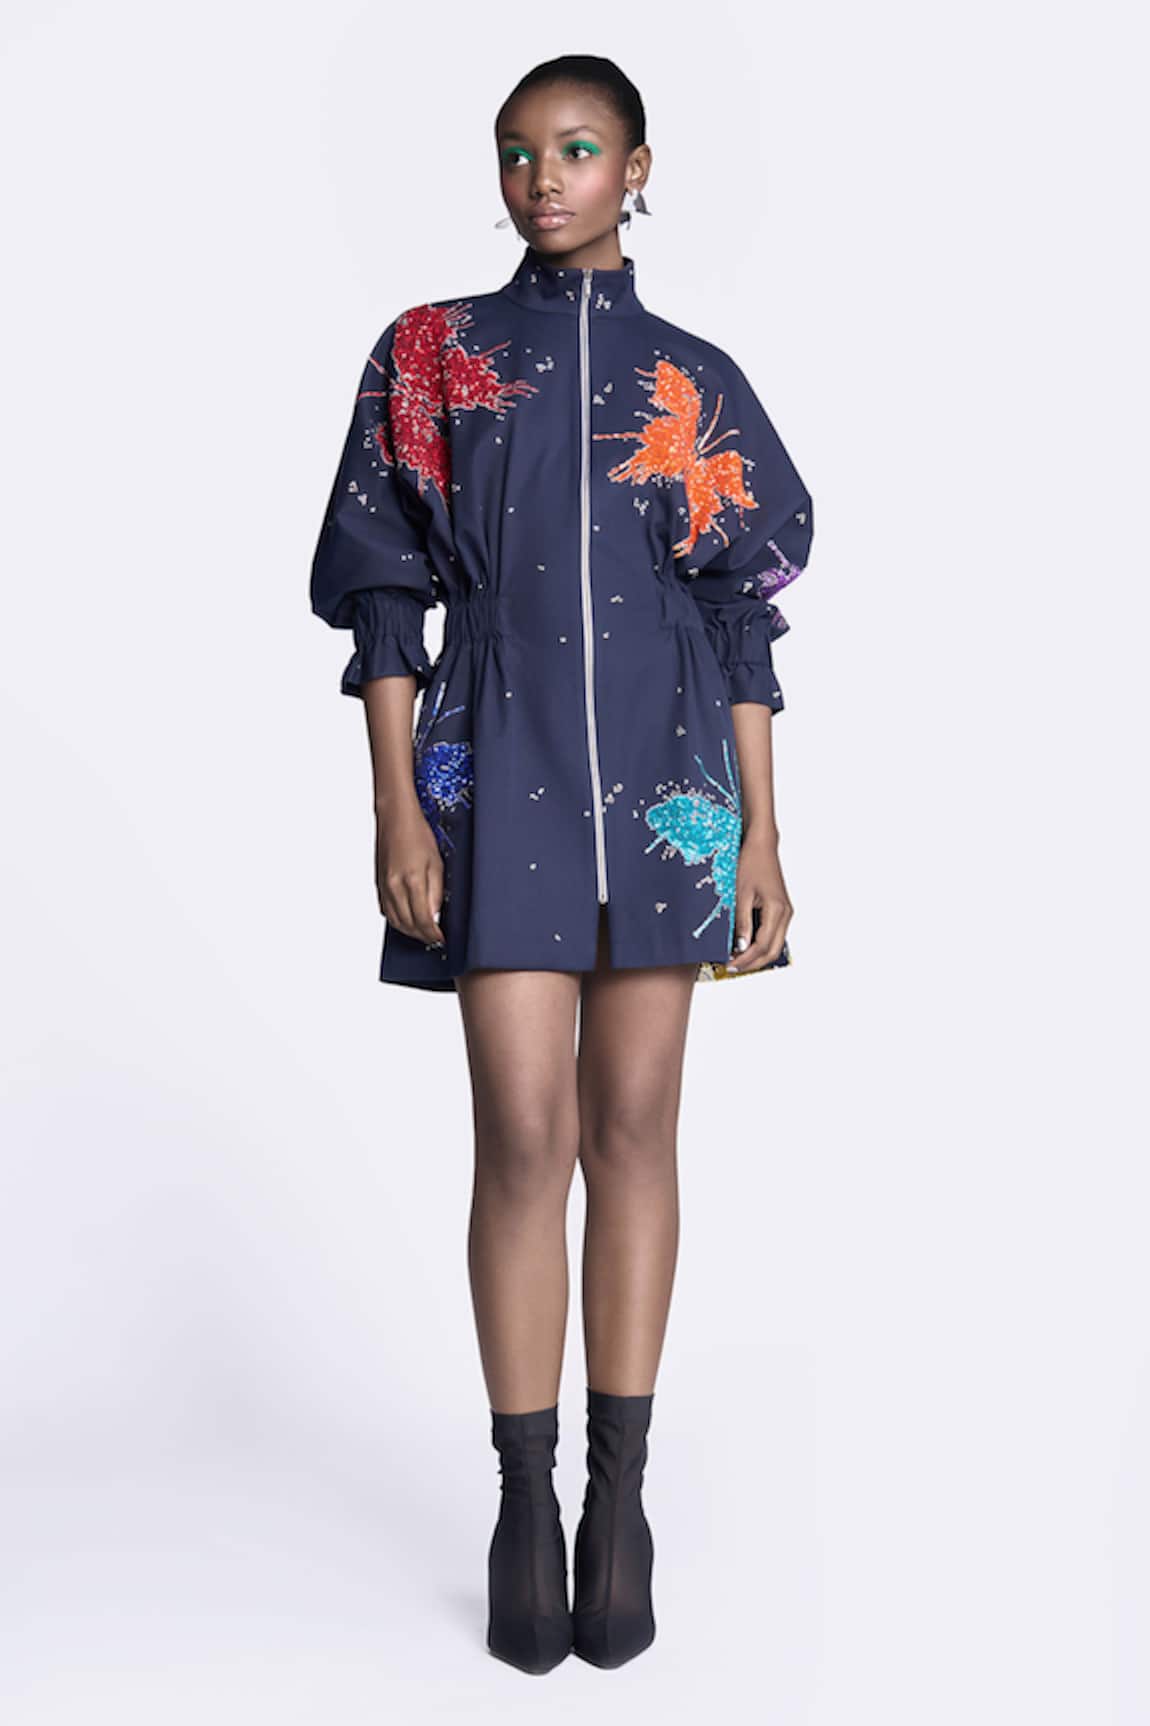 Shahin Mannan Butterfly Splashes Embroidered Jacket Dress